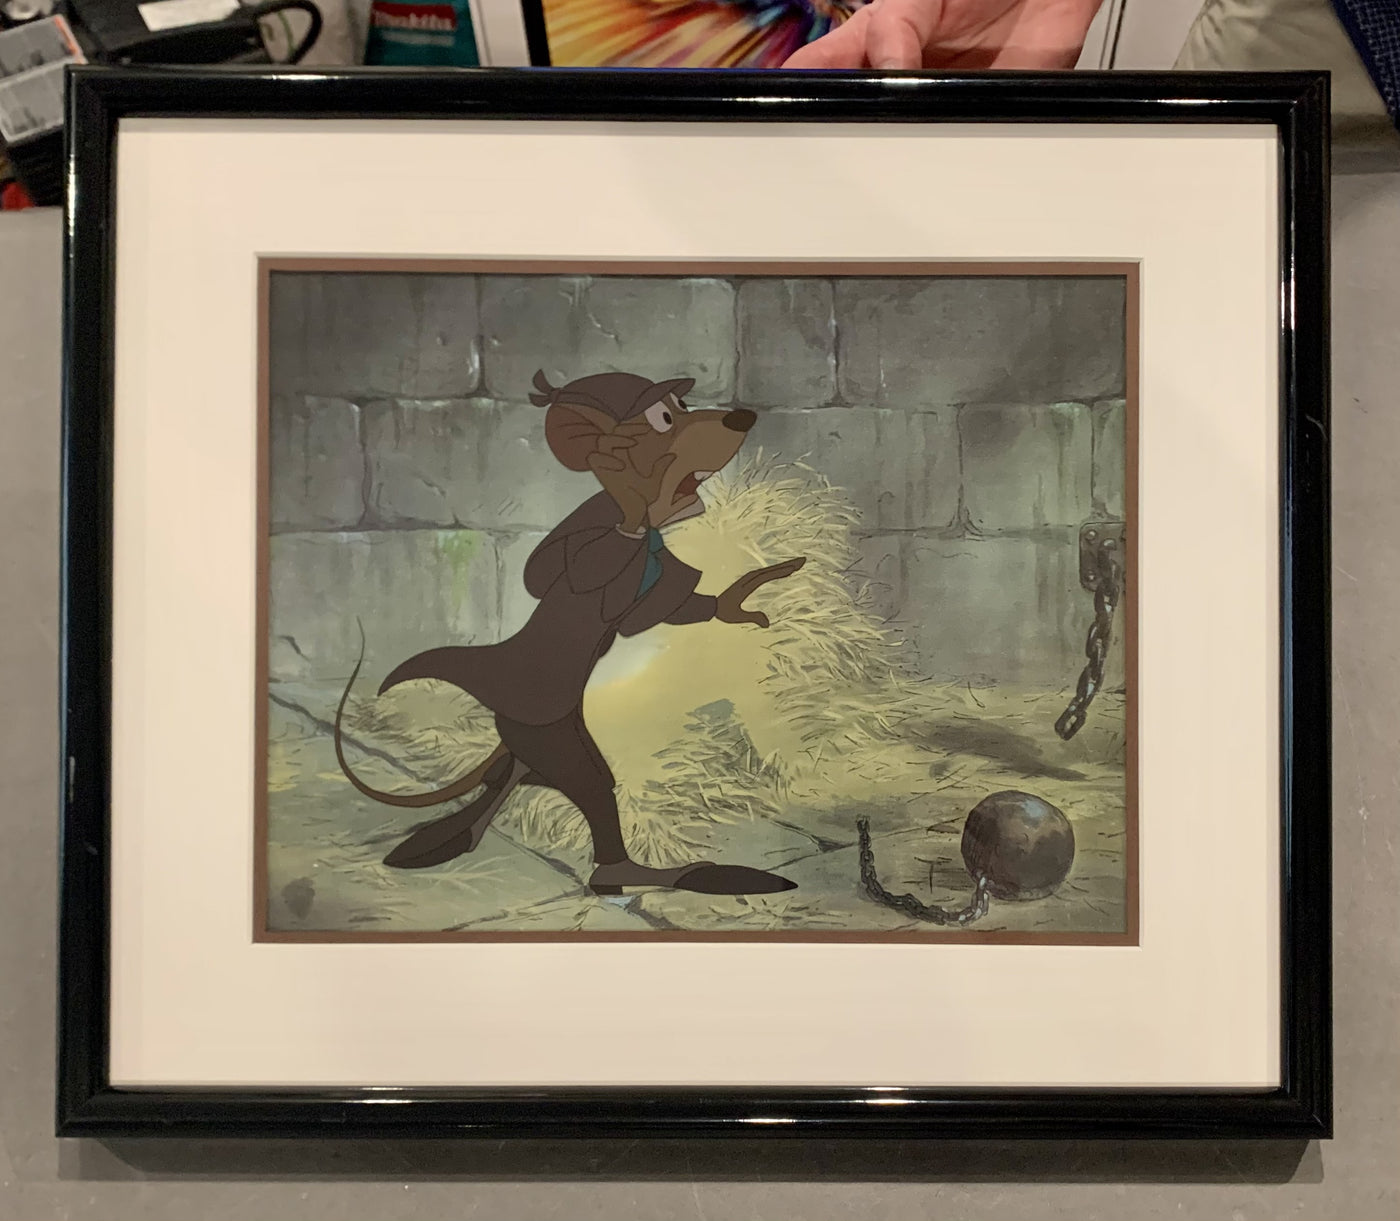 Original Walt Disney Production Cel from The Great Mouse Detective featuring Basil